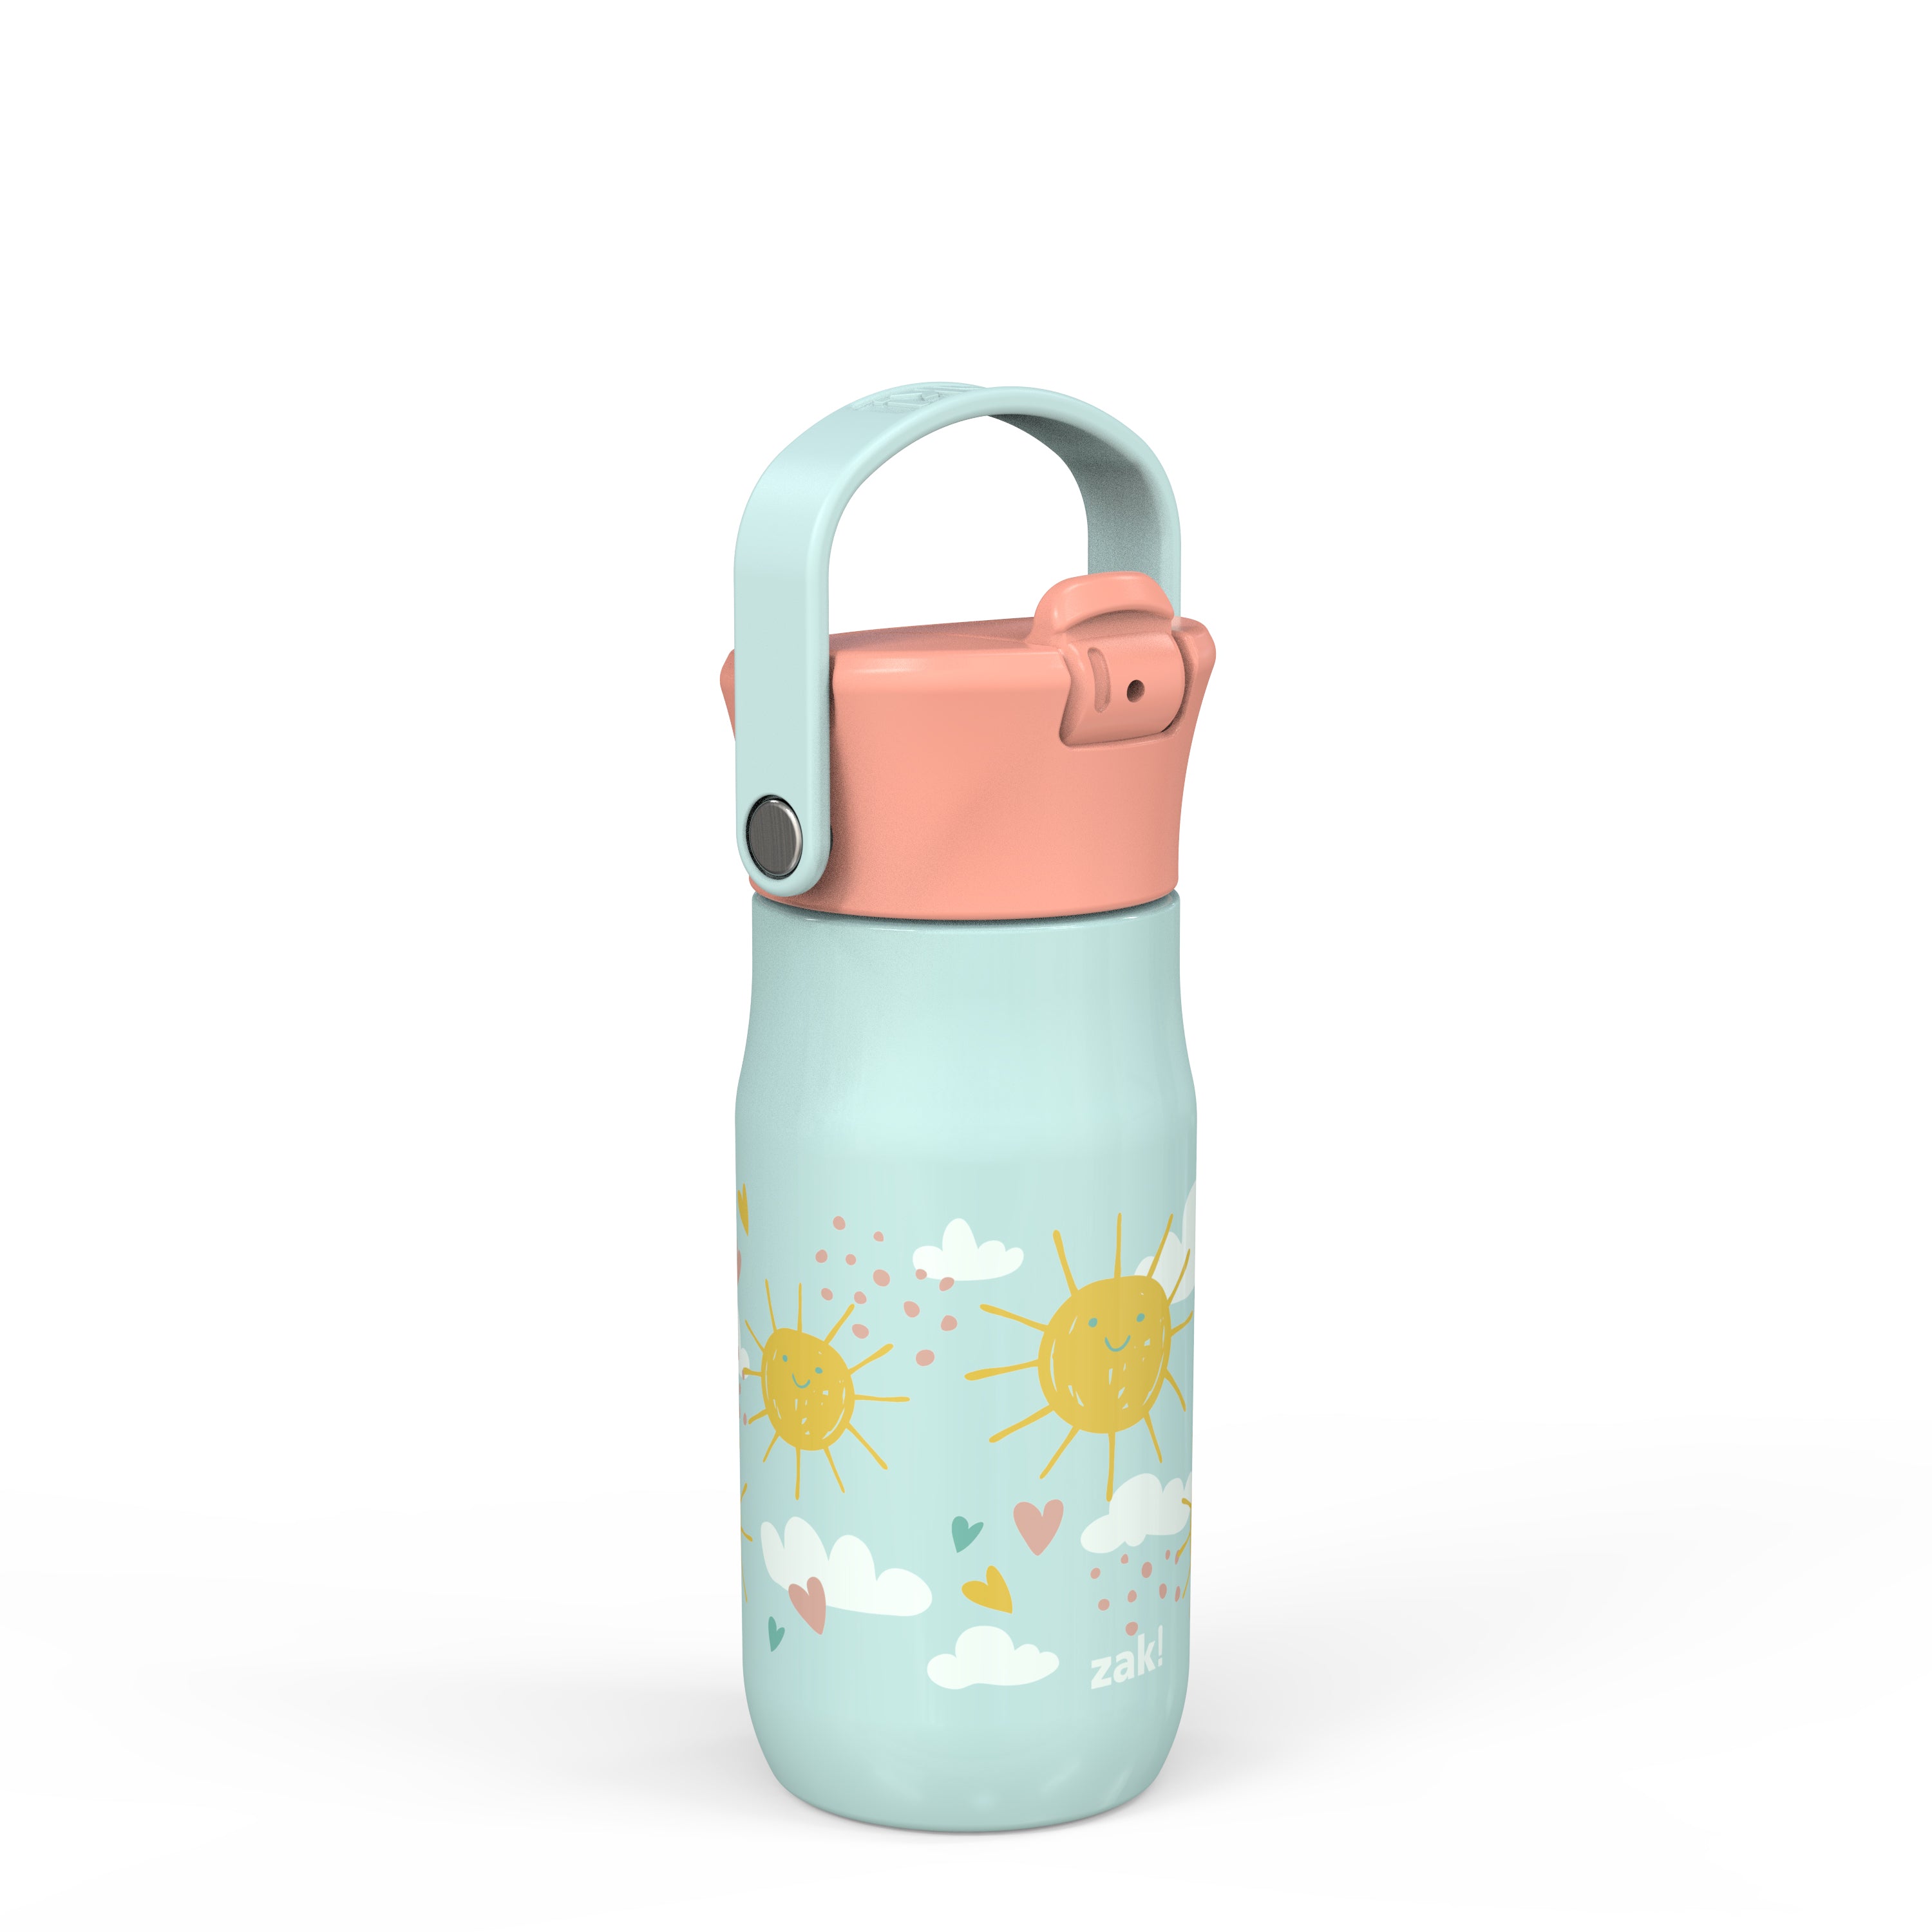 NEW Splash Leak Proof Water Bottle Safe for Toddlers and Kids